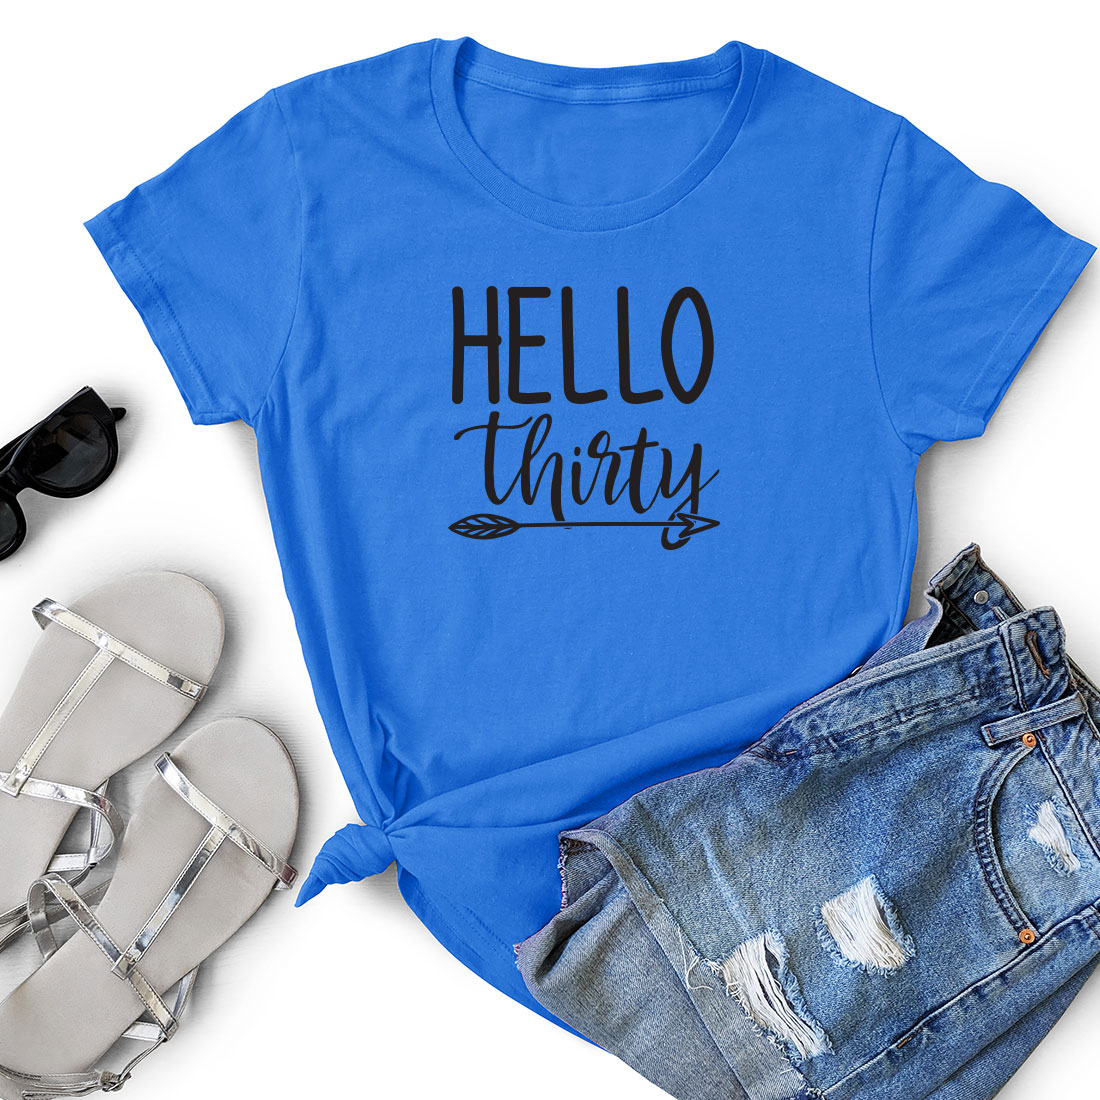 T - shirt that says hello thirty next to a pair of shorts.